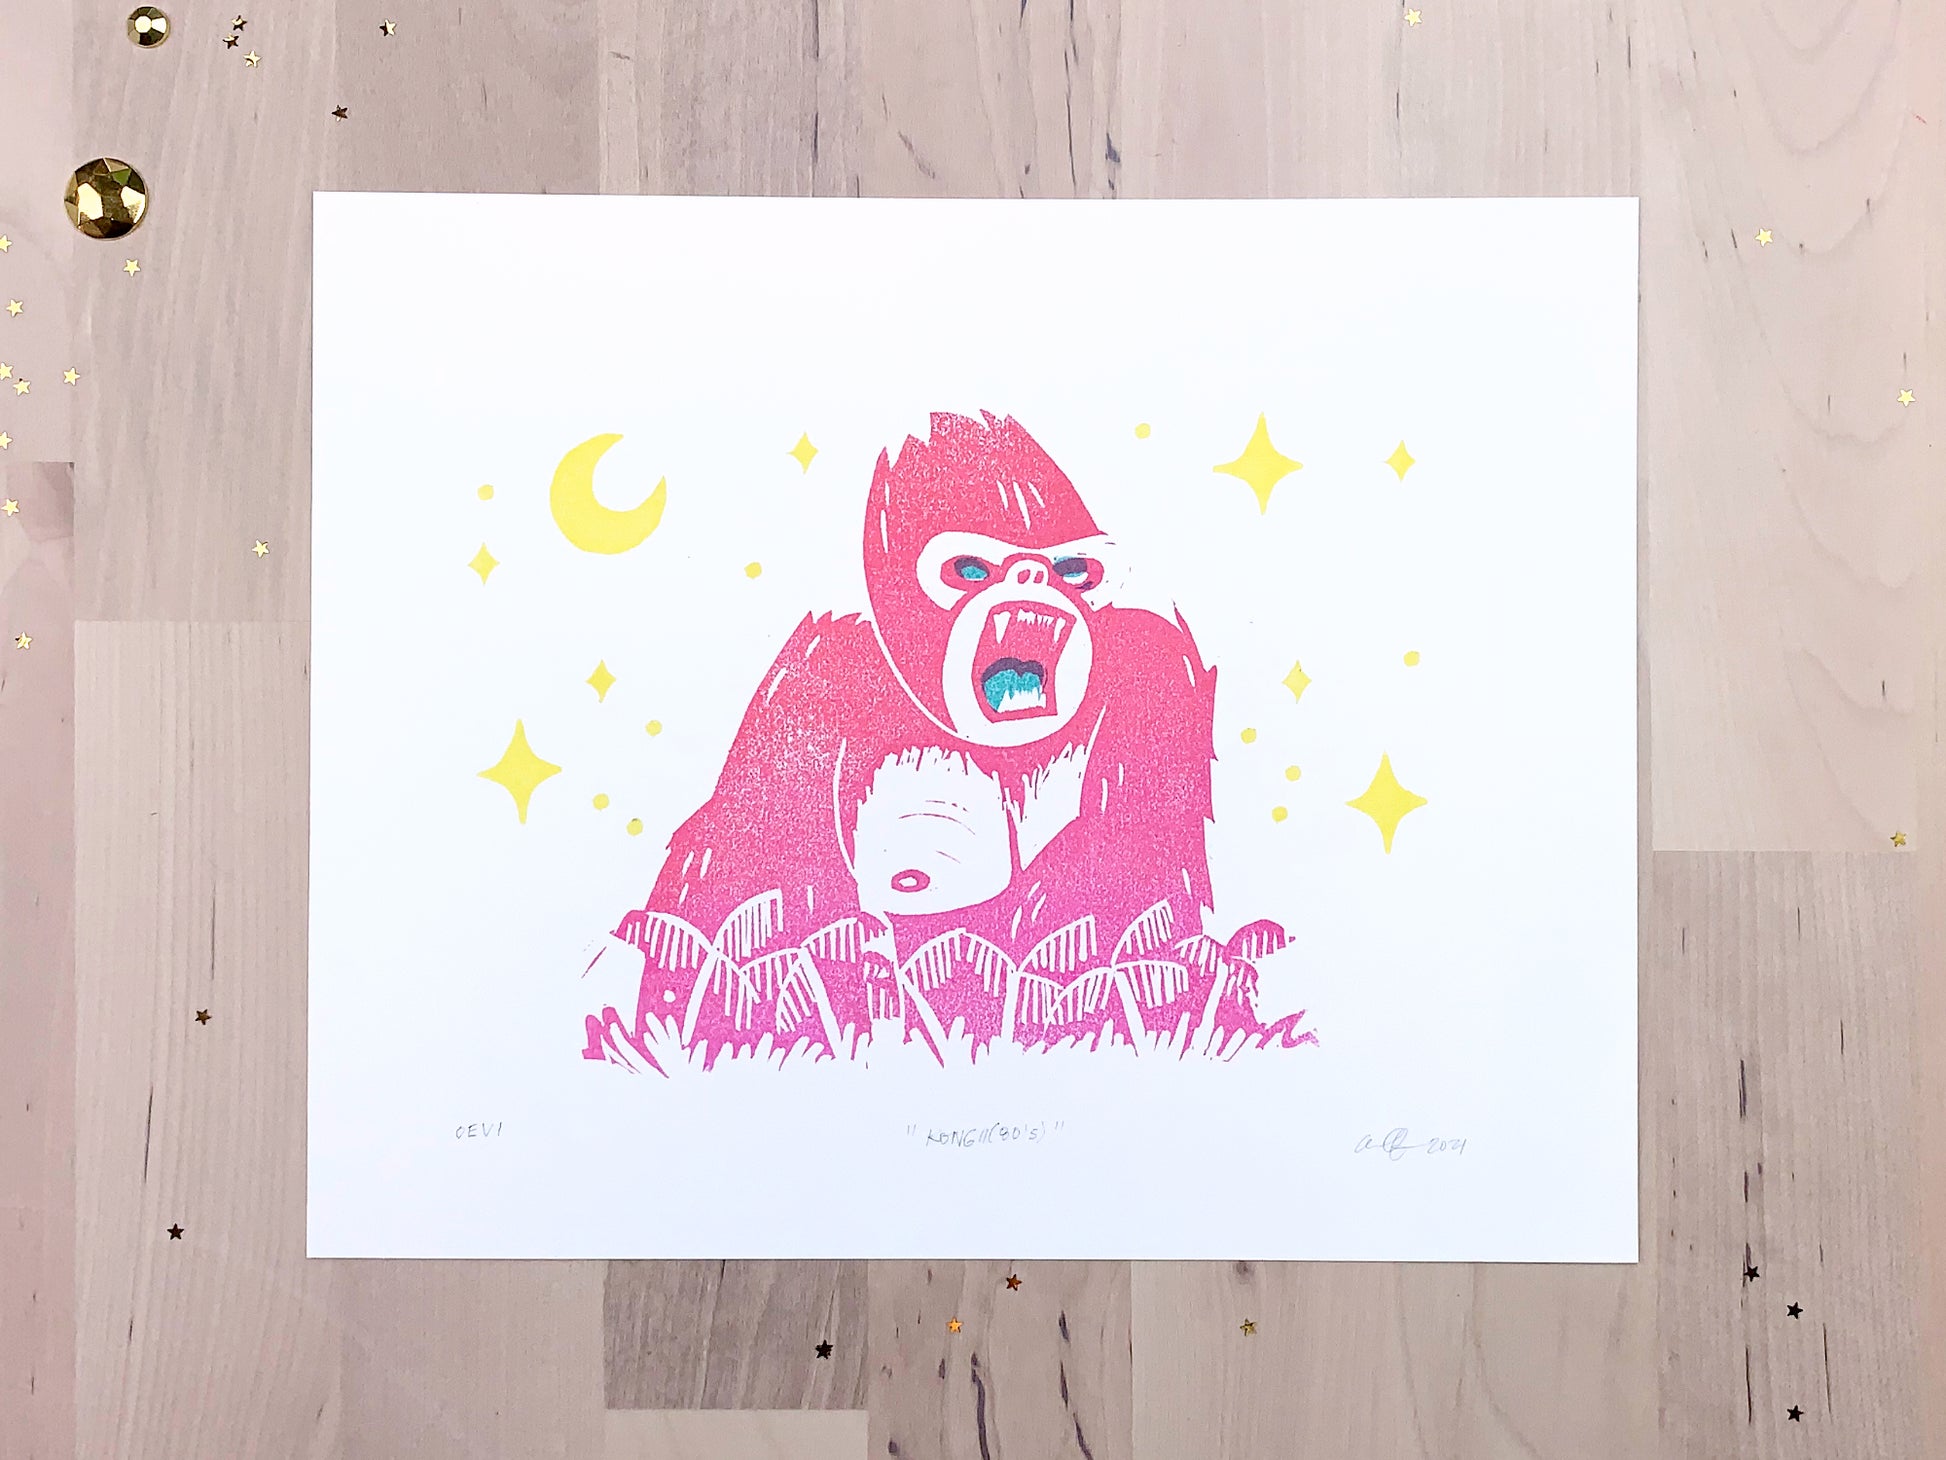 Original art print by Amber Orenstein. Relief print of a pink King Kong roaring on his jungle island home.